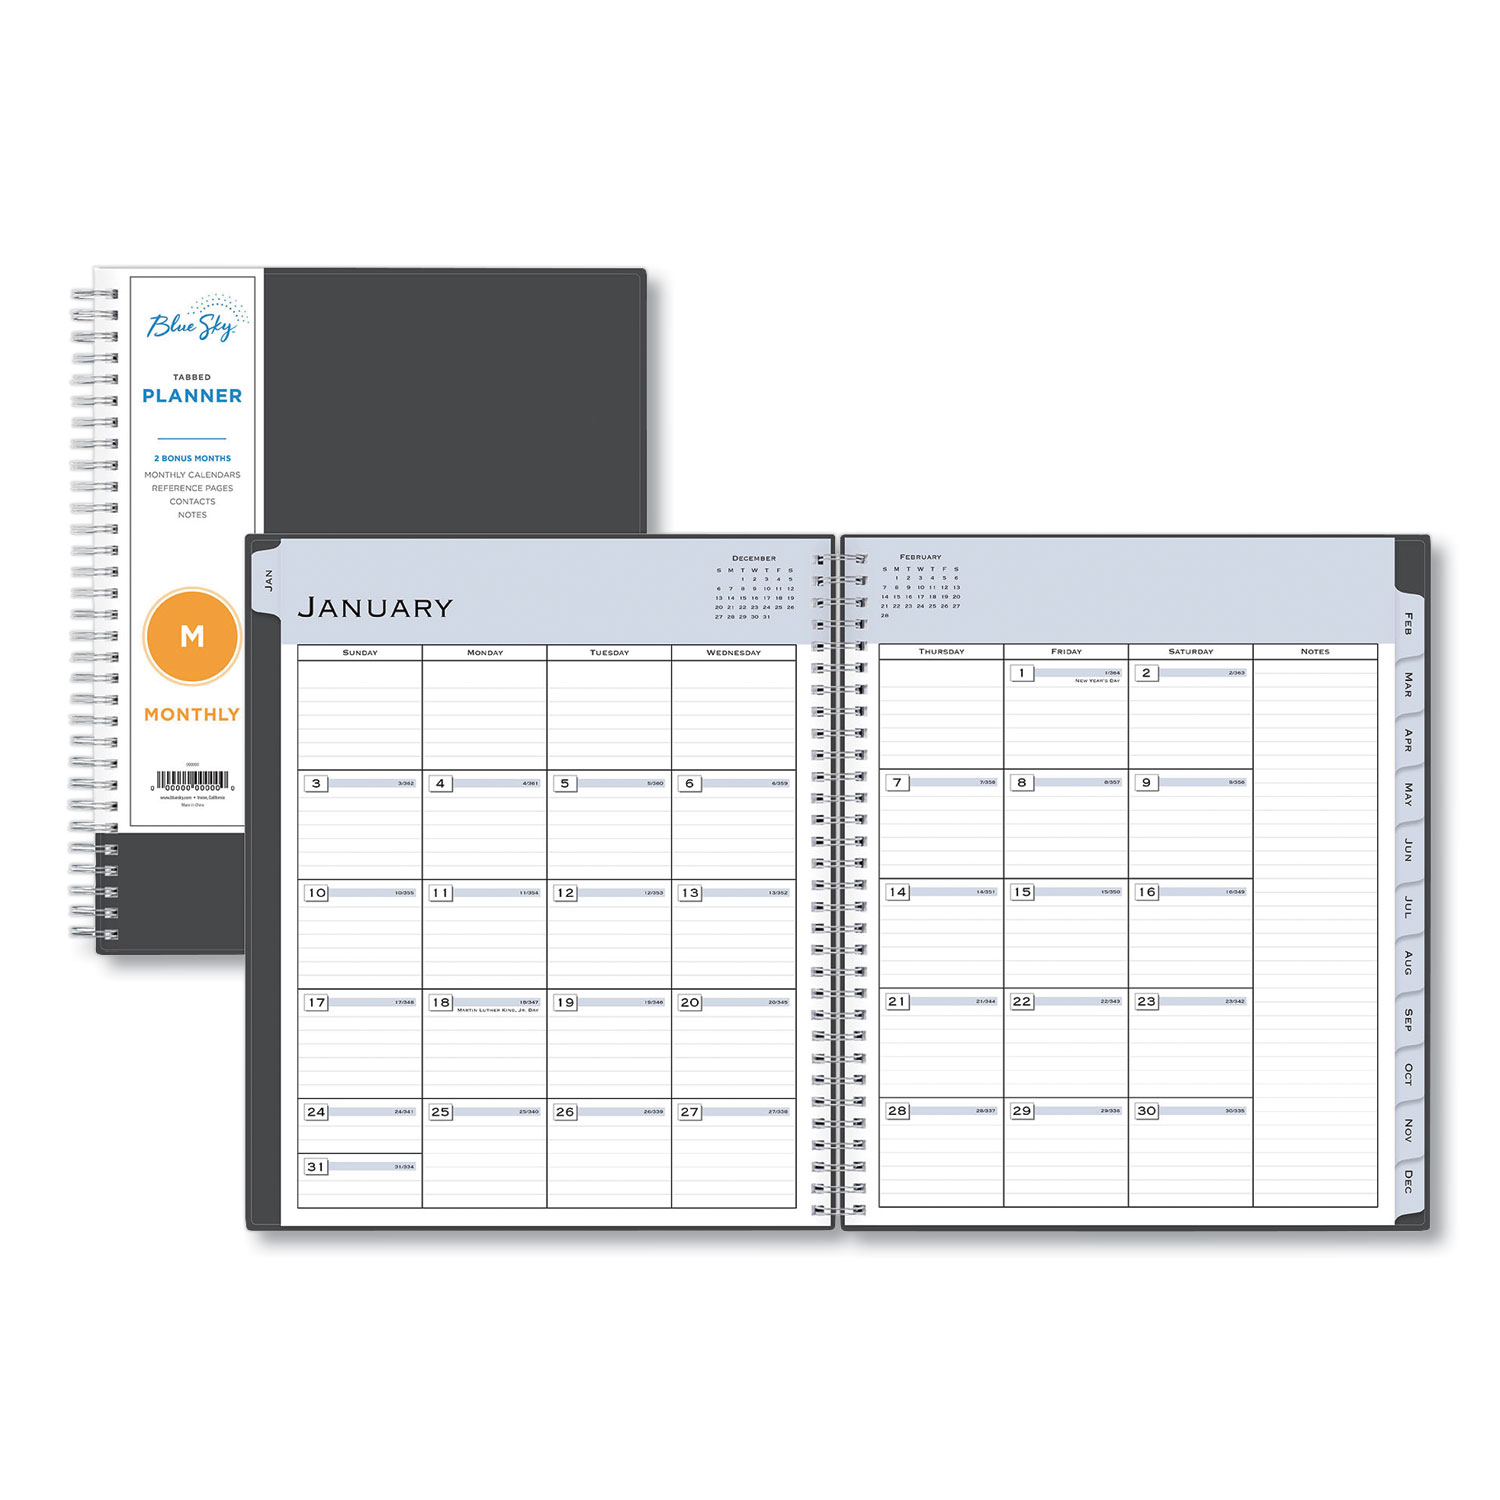  Blue Sky 100011 Passages Monthly Wirebound Planner, 10 x 8, Charcoal, 2020 (BLS100011) 